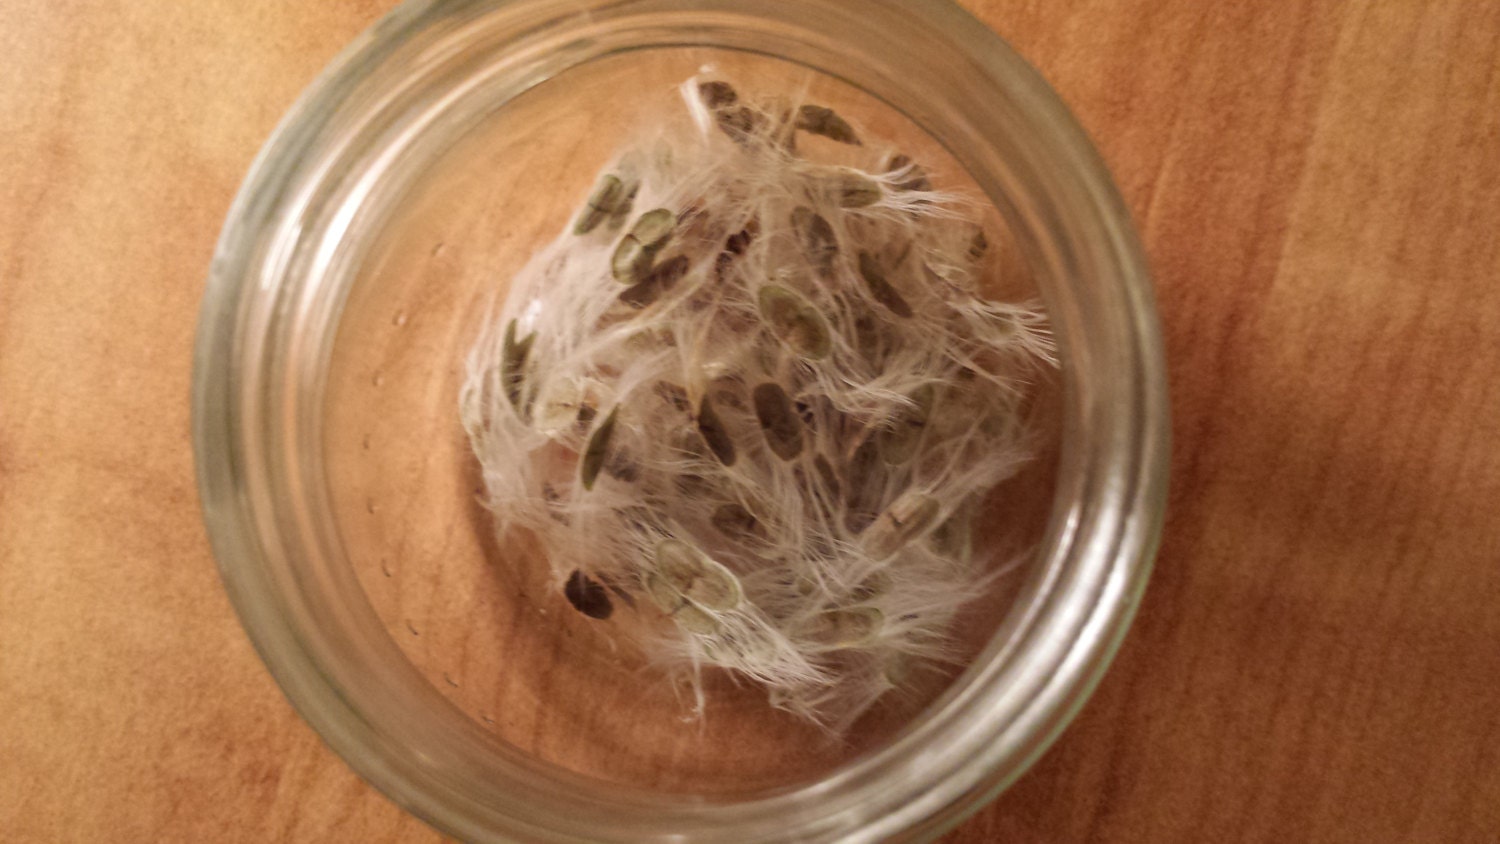 loose desert willow seeds in a glass jar